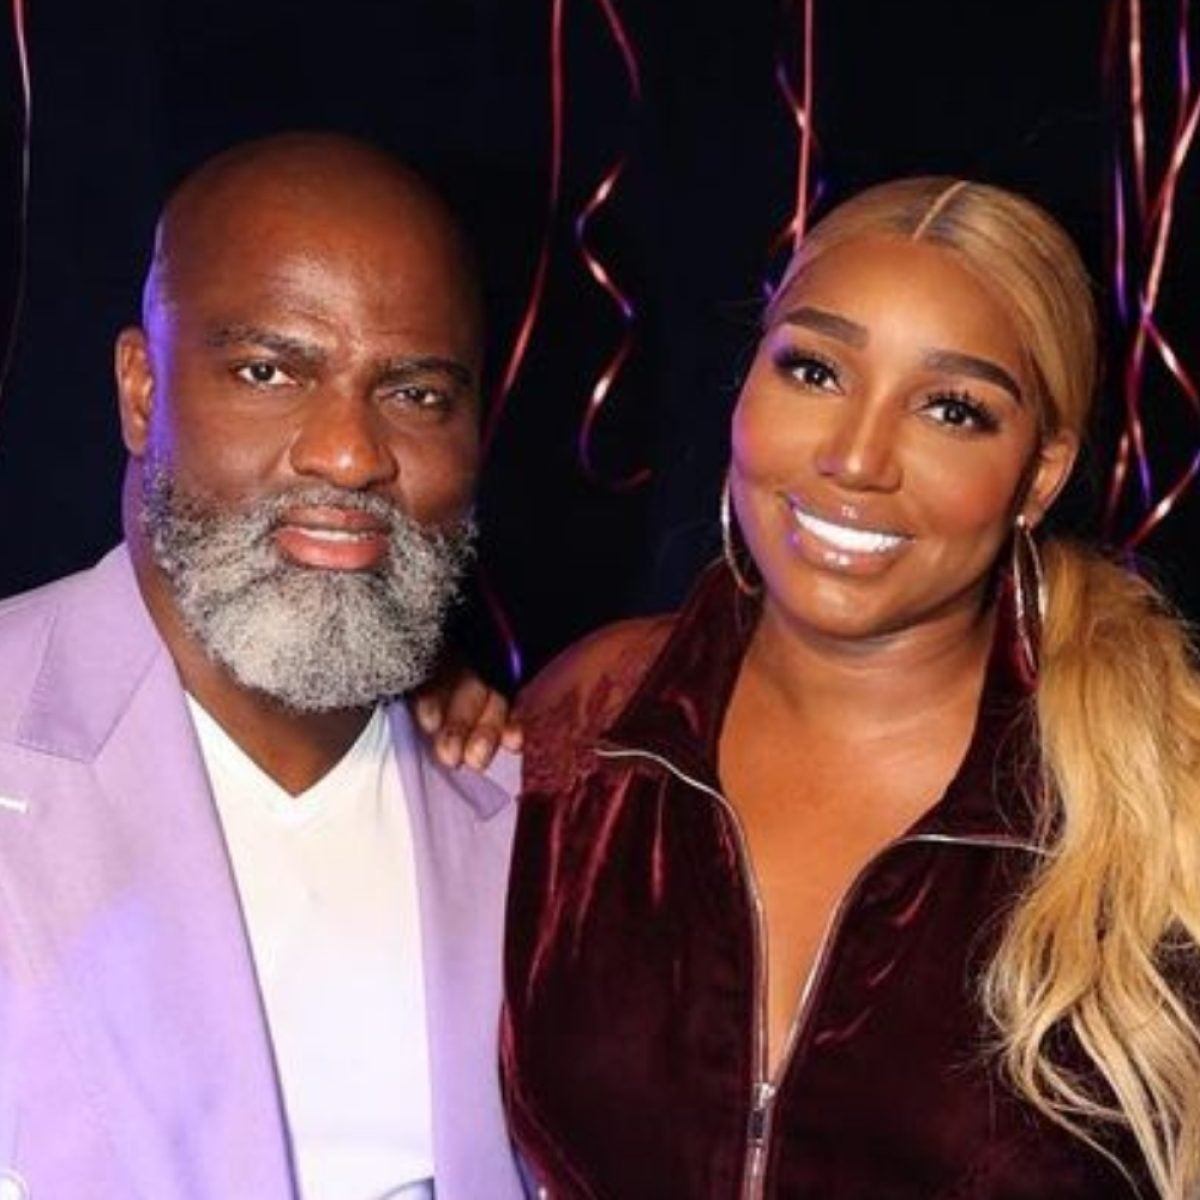 NeNe Leakes Confirms She's Dating Menswear Designer Nyonisela Sioh: 7 Things To Know About Him